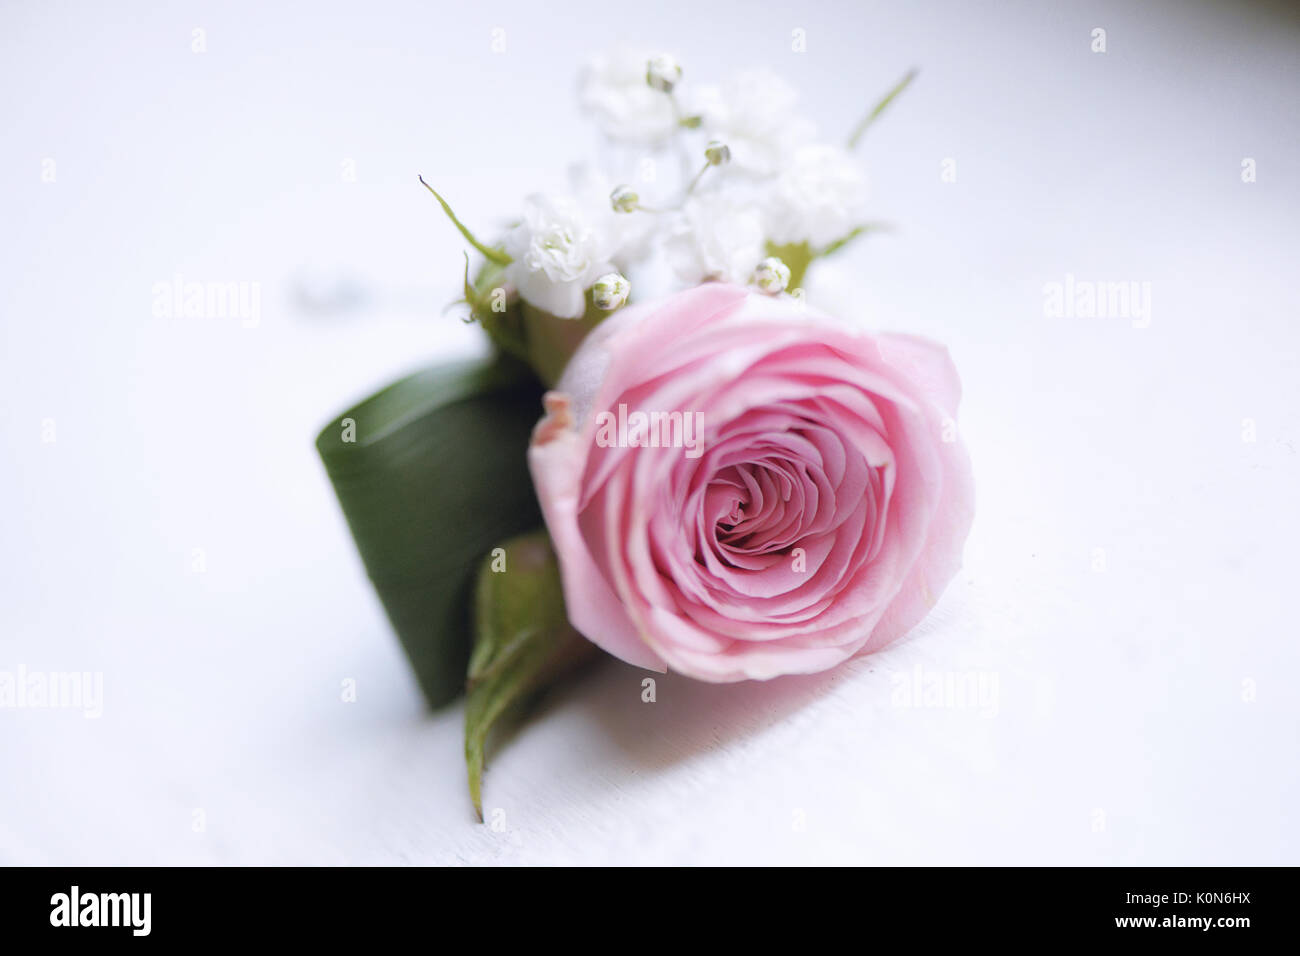 Wedding accessories: delicate pink rose small bouquet for buttonhole used by groom and wedding guests positioned against a white background. Stock Photo